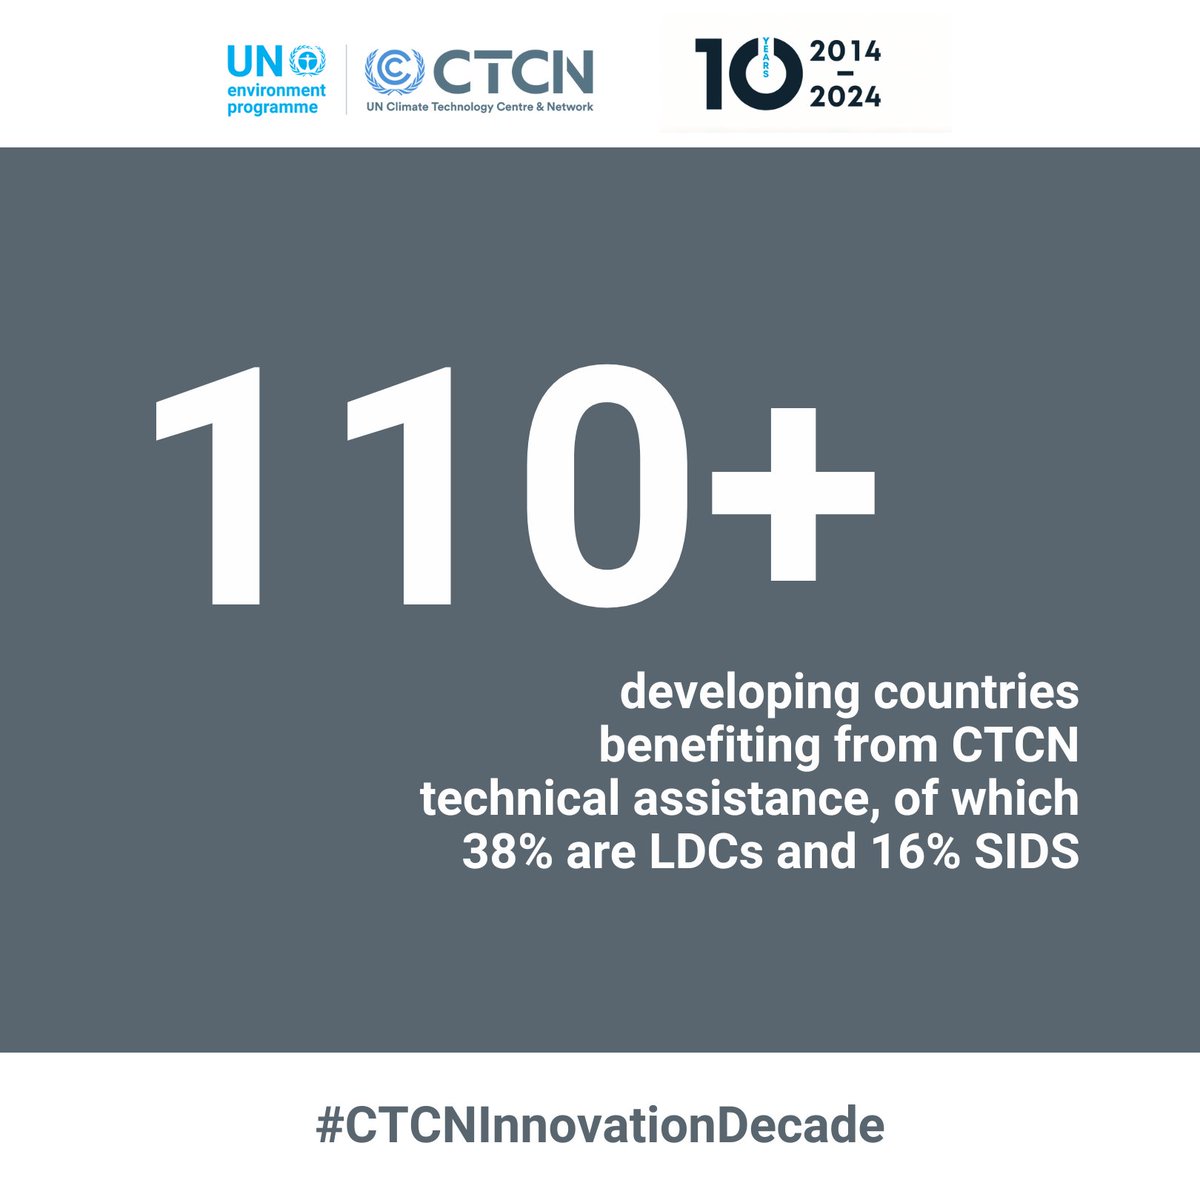 #CTCNInnovationDecade: In the last decade, over 110 developing countries have benefited from CTCN technical assistance, with 38% representing LDCs and 16% SIDS. Join us as we commemorate CTCN's journey and achievements: bit.ly/3Q8kSVK @UNEP / @UNFCCC